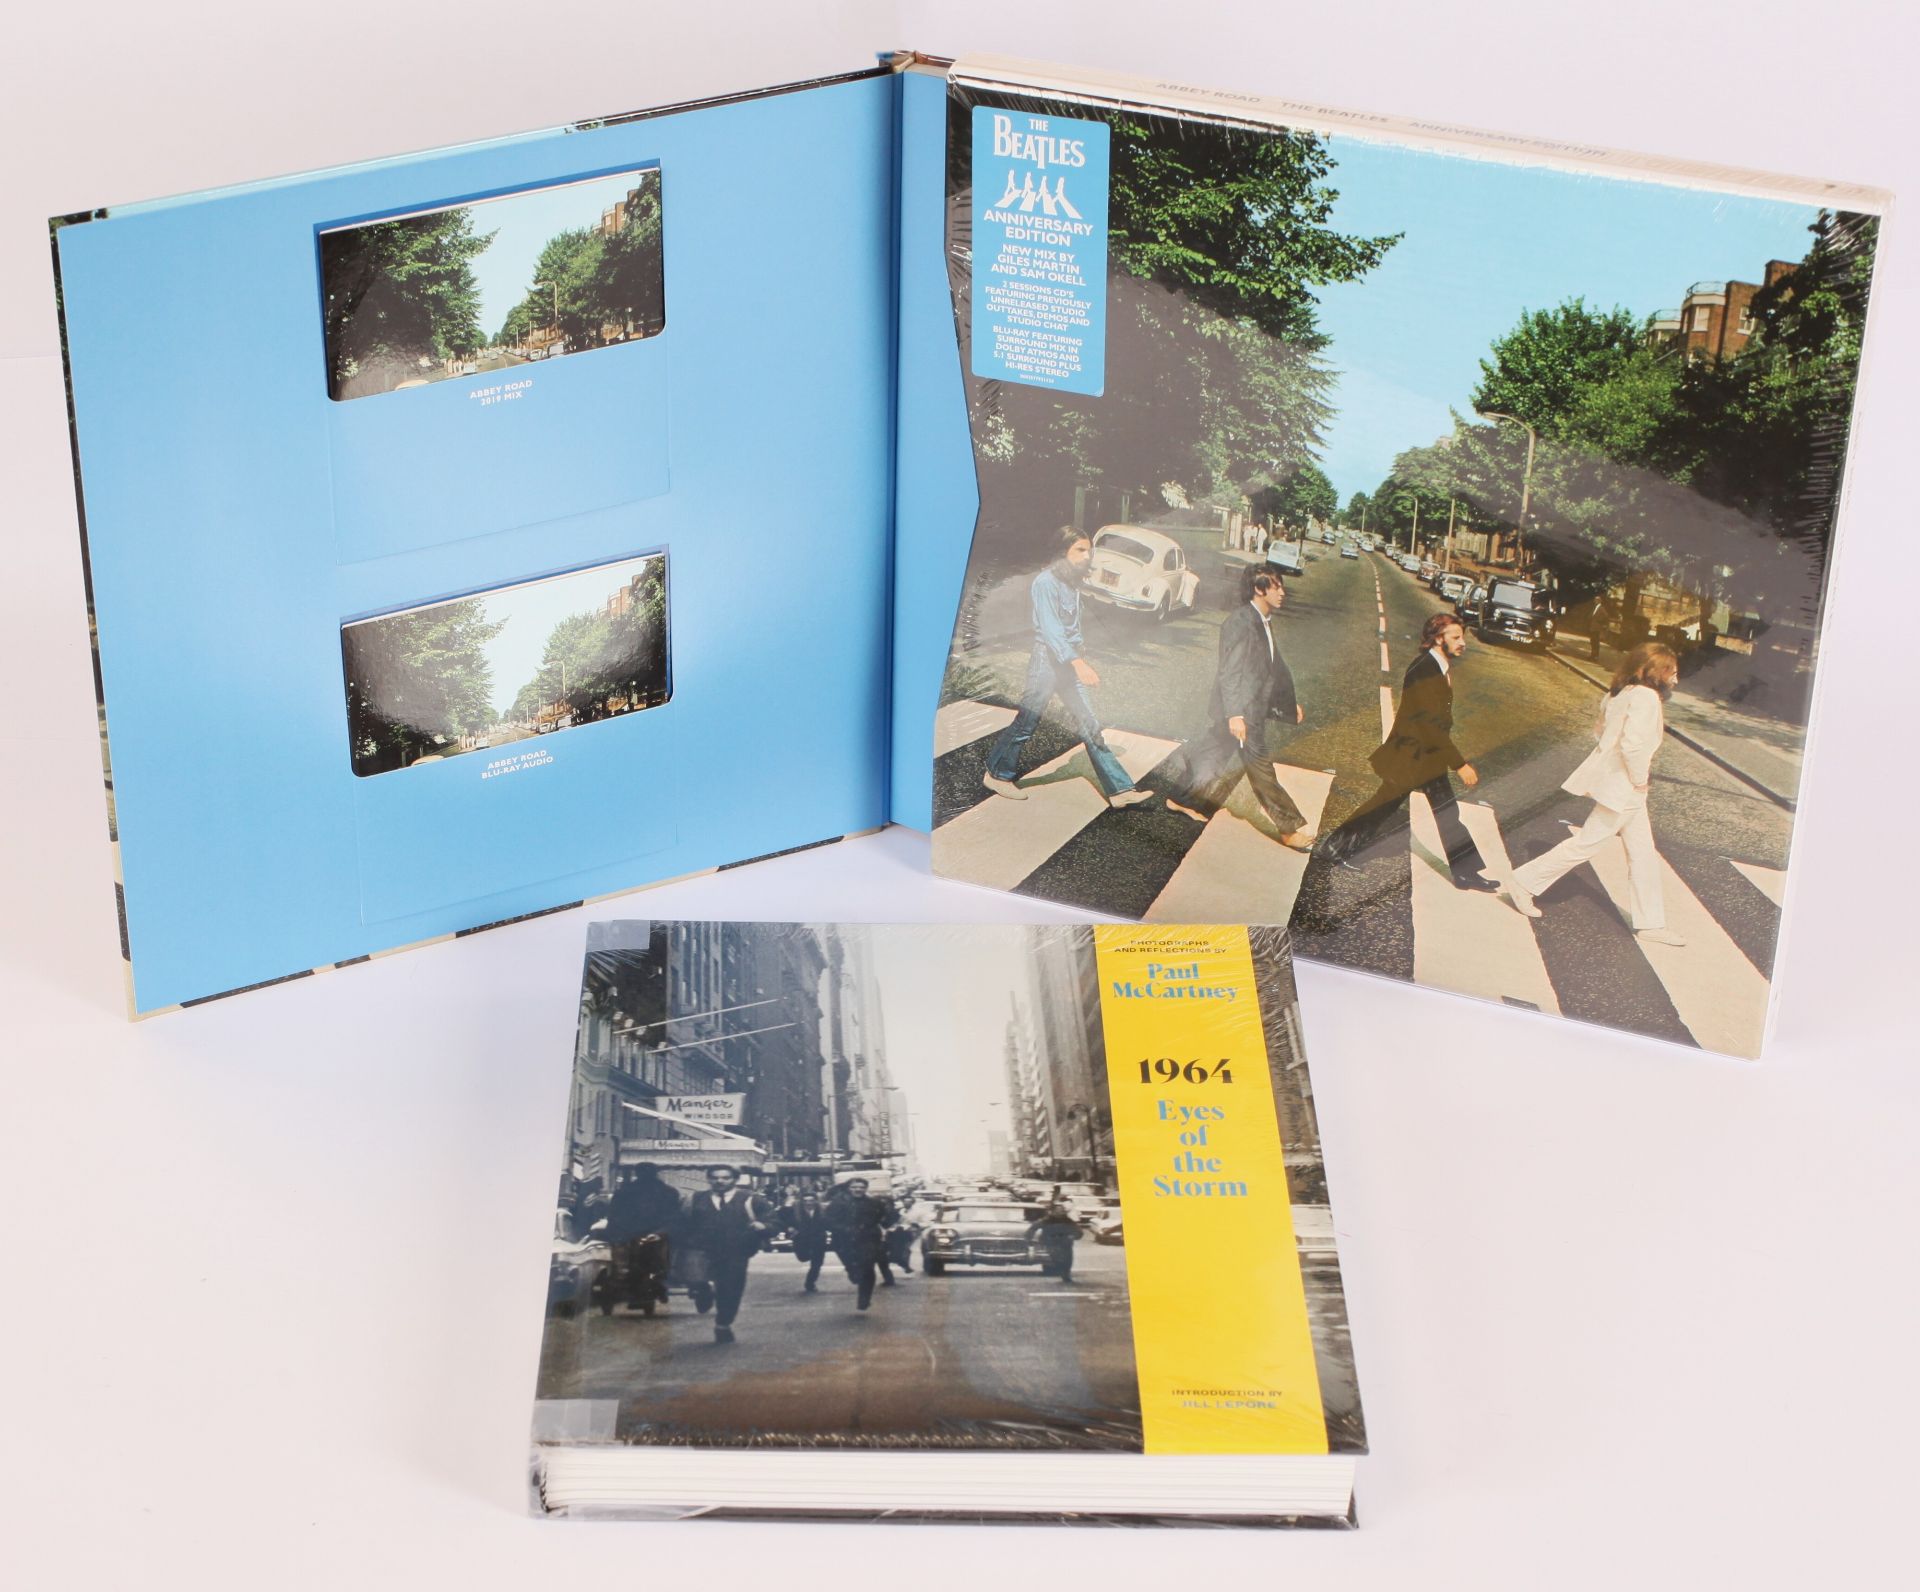 The Beatles - Abbey Road Anniversary CD Boxset And 1964: Eye Of The Storm book